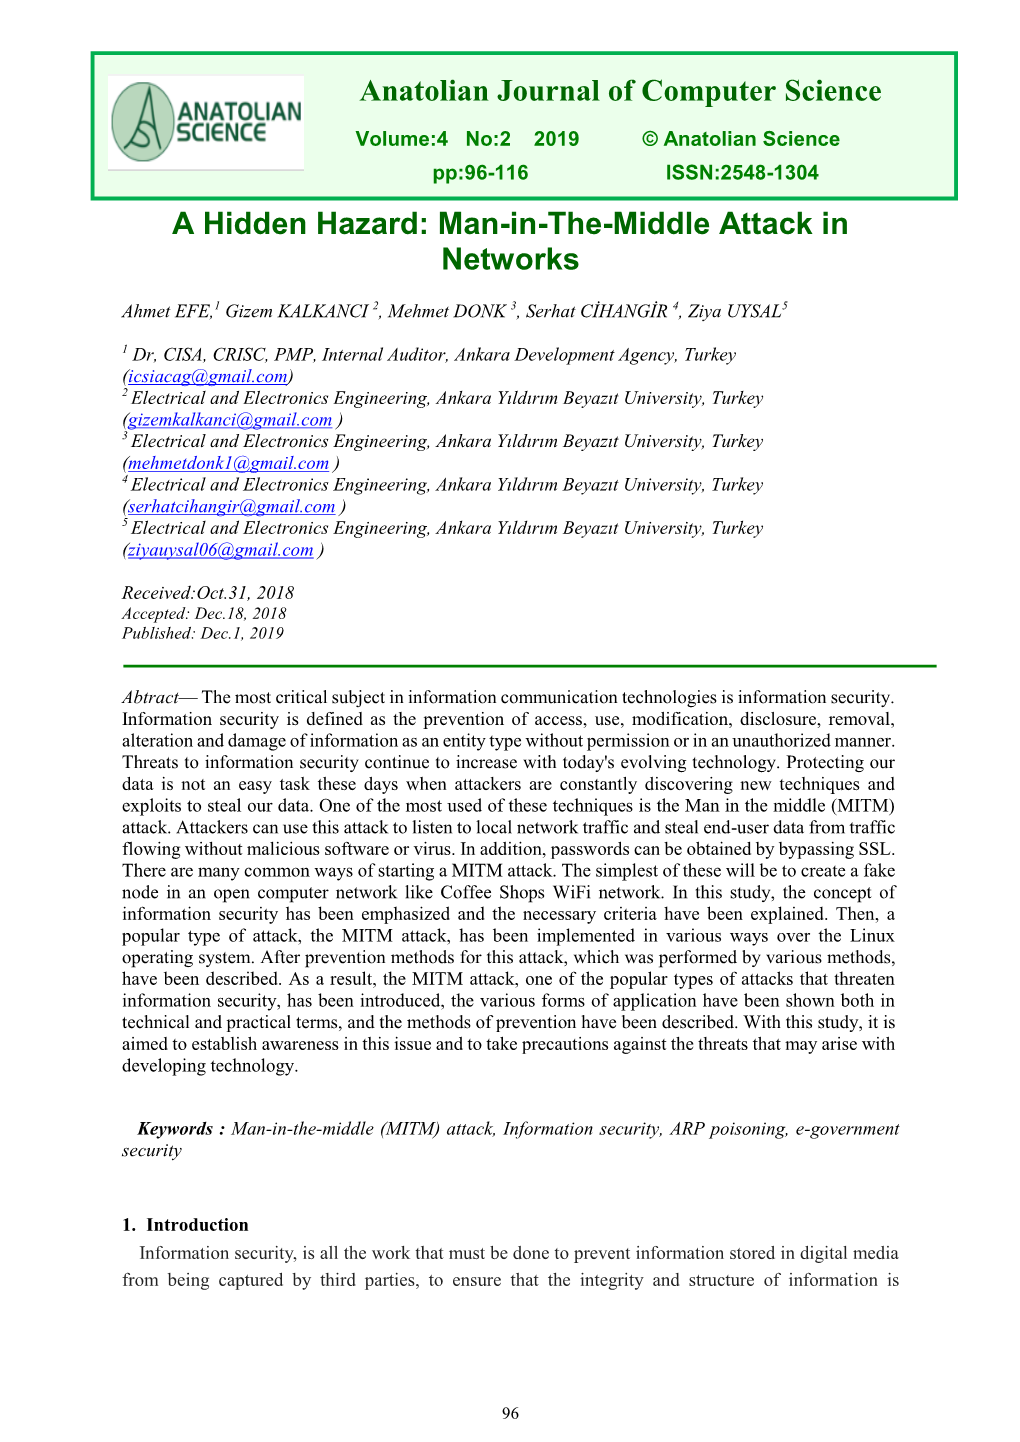 A Hidden Hazard: Man-In-The-Middle Attack in Networks